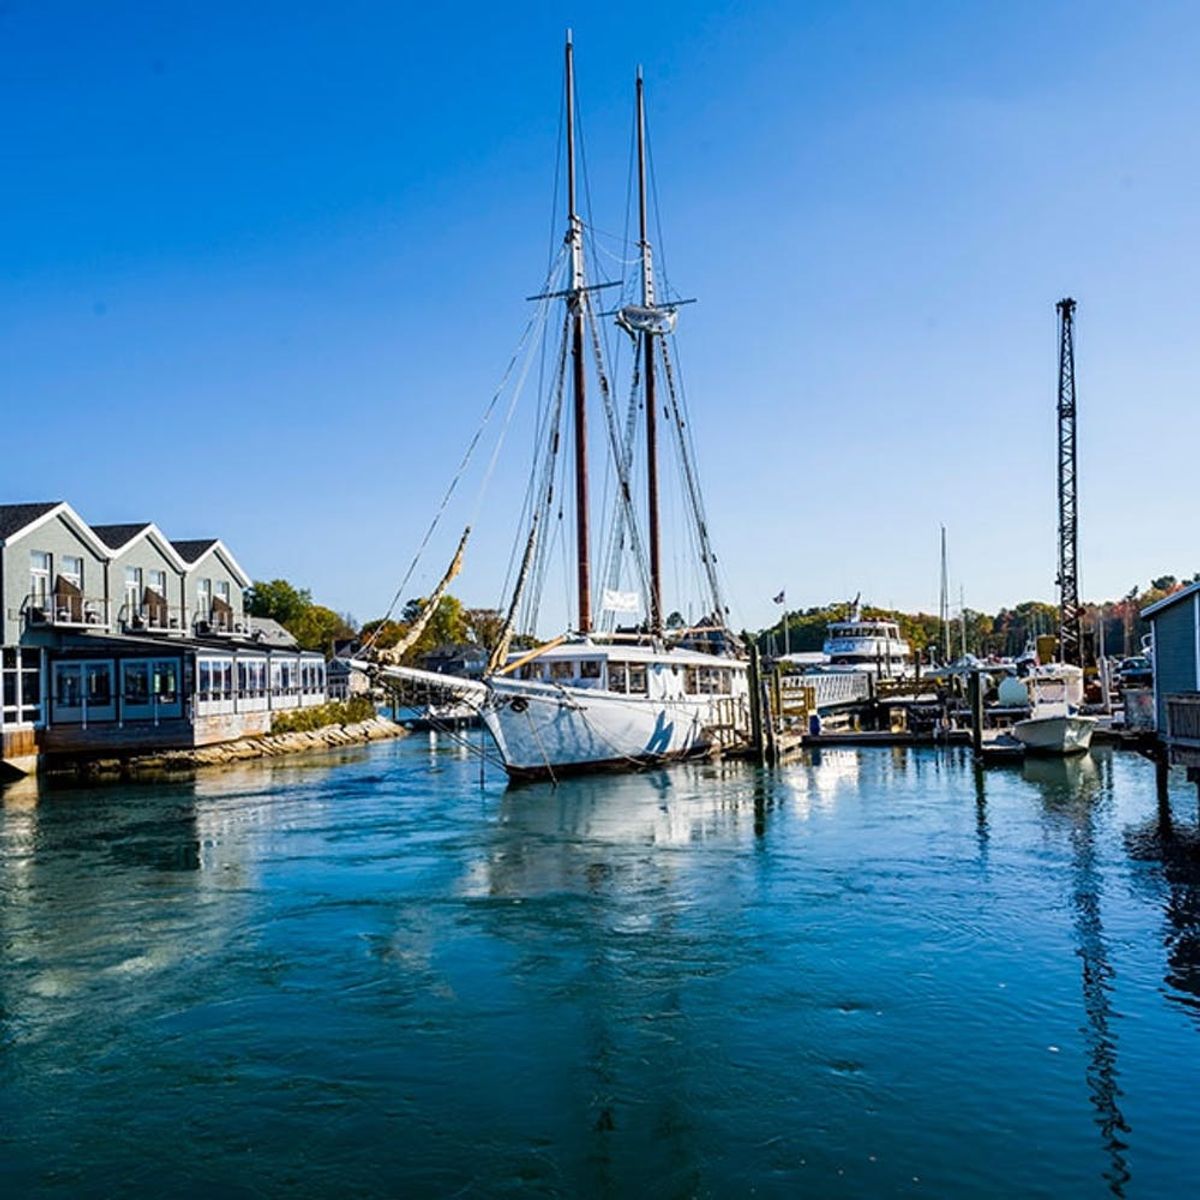 Discover the Way Life Should Be in Kennebunkport